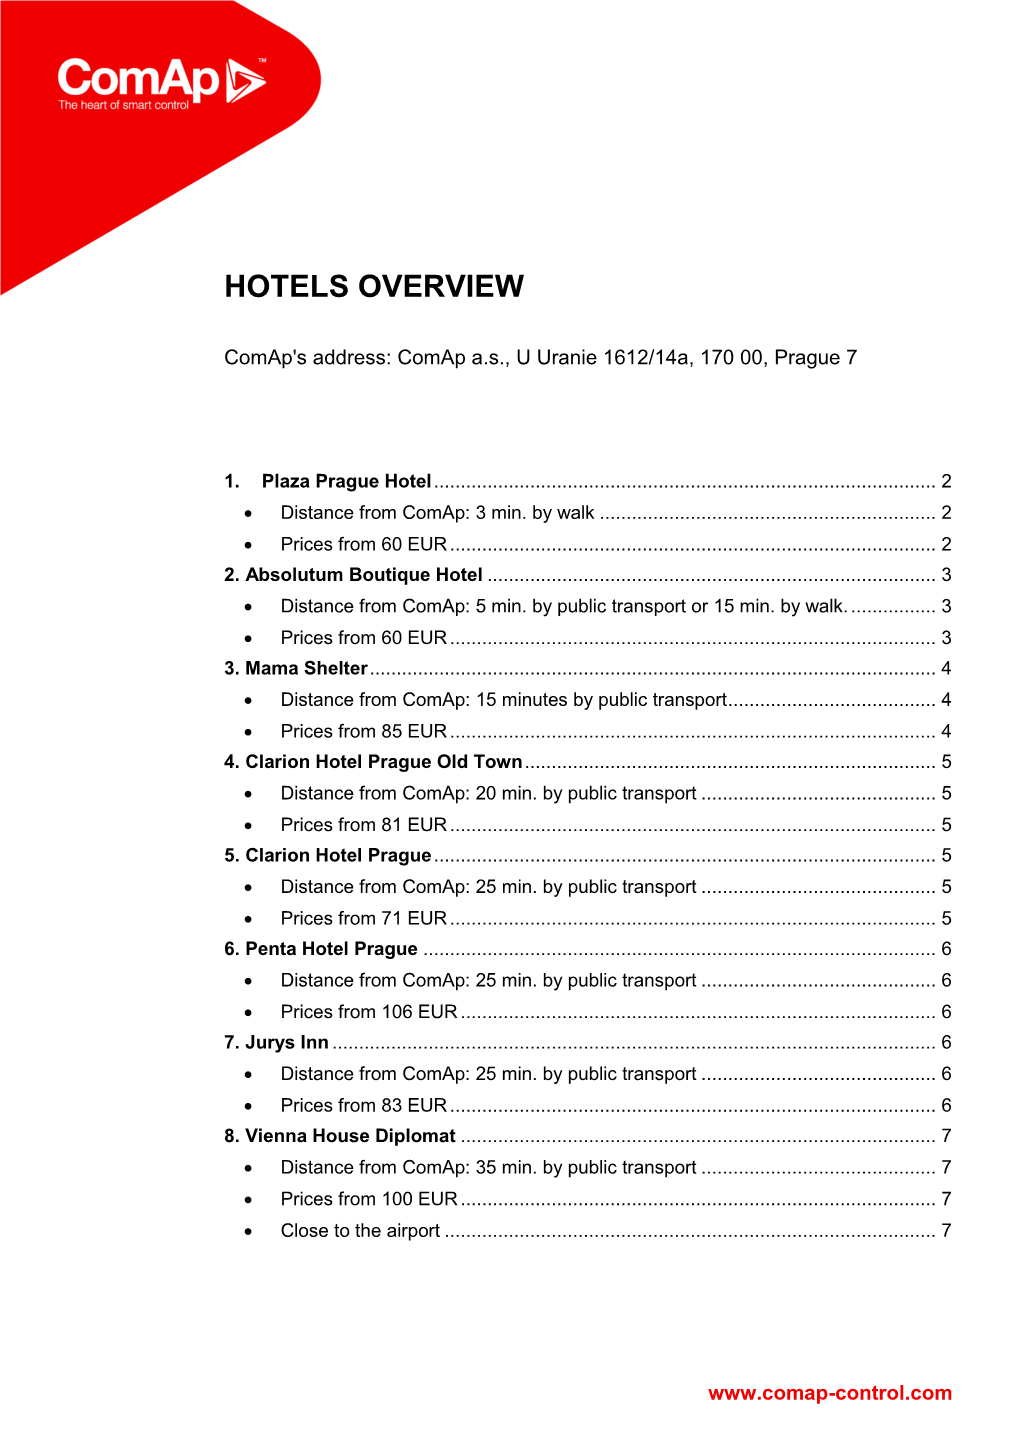 Hotels Overview